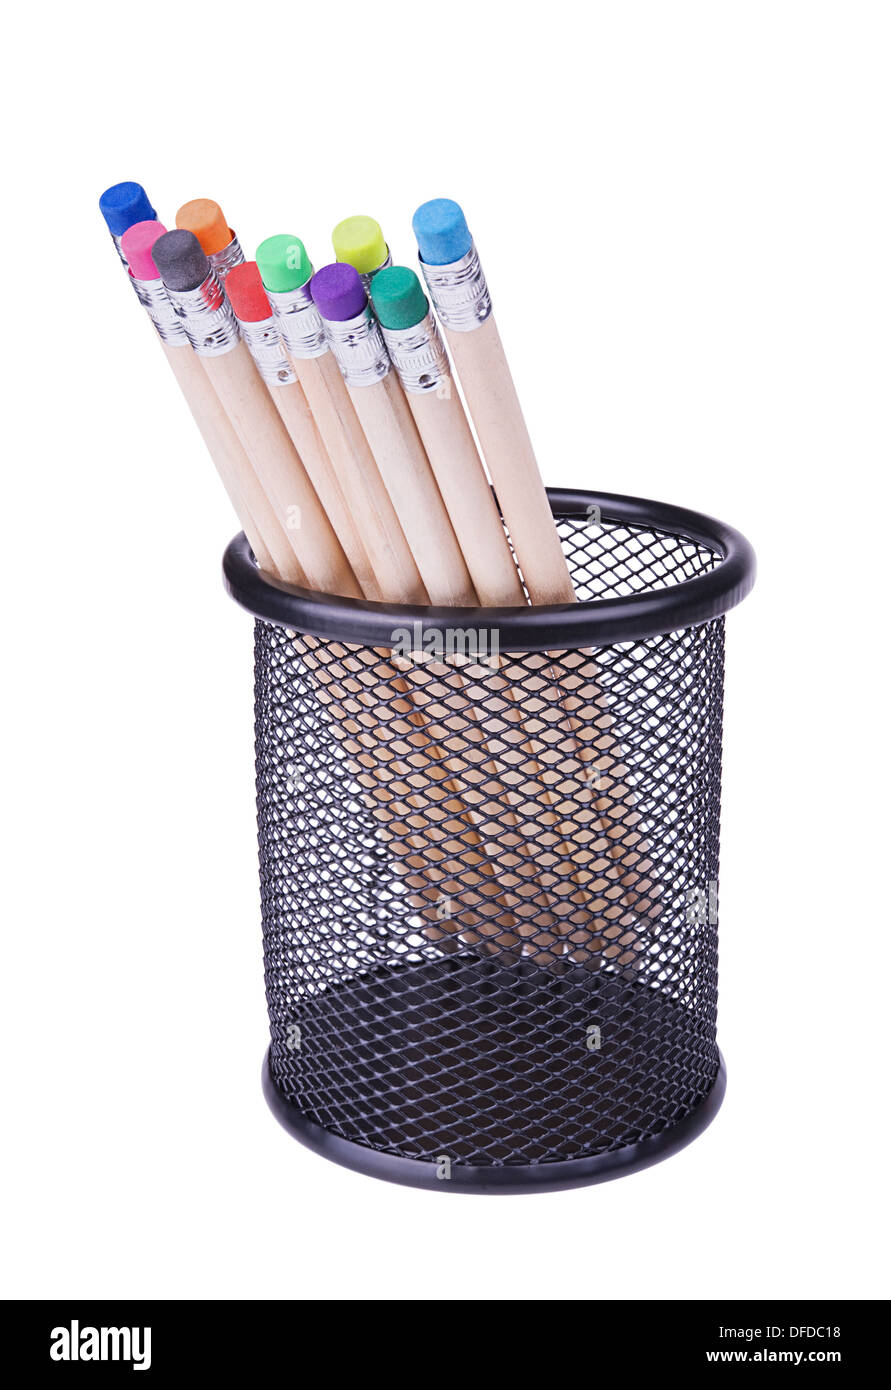 Several pencils with erasers different colours in a mesh cup isolated on white background Stock Photo